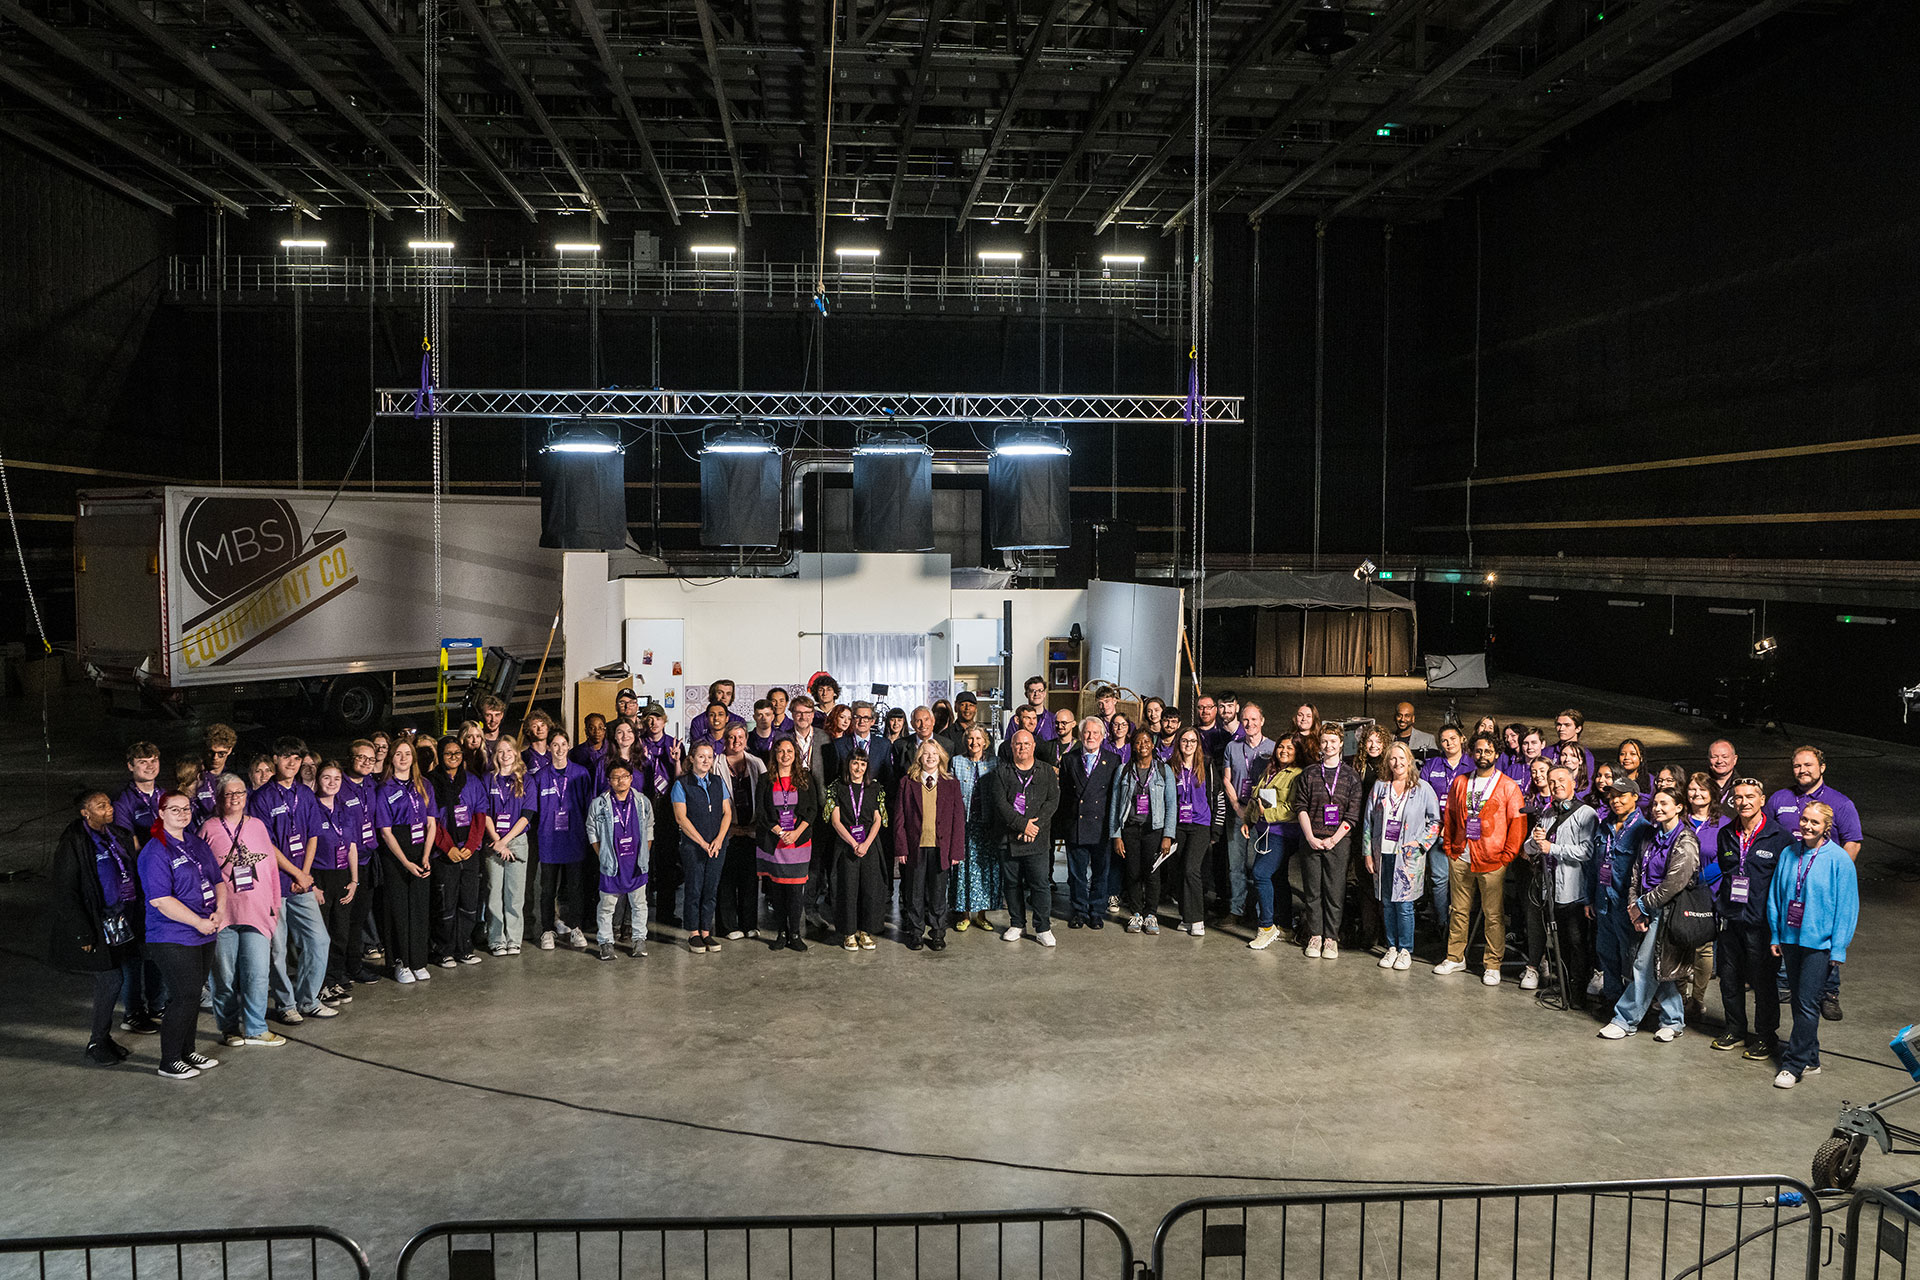 A group shot of the Screen Berkshire project partners and film crew from the launch event, against a film set backdrop